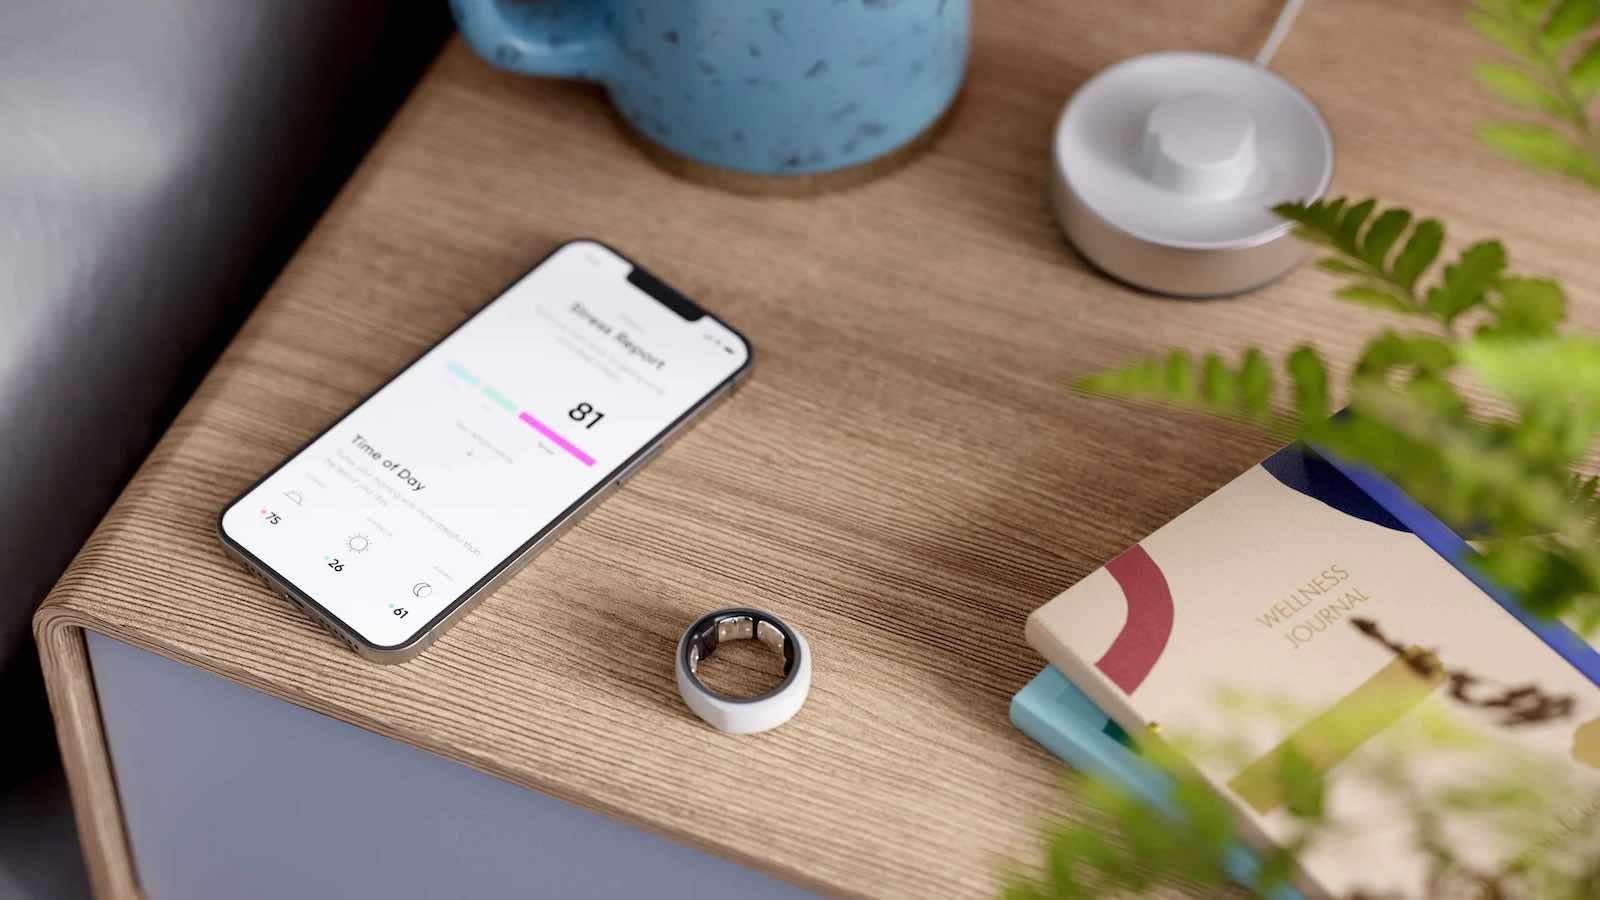 Happy Ring wearable smart ring is designed exclusively to monitor your mind & well-being